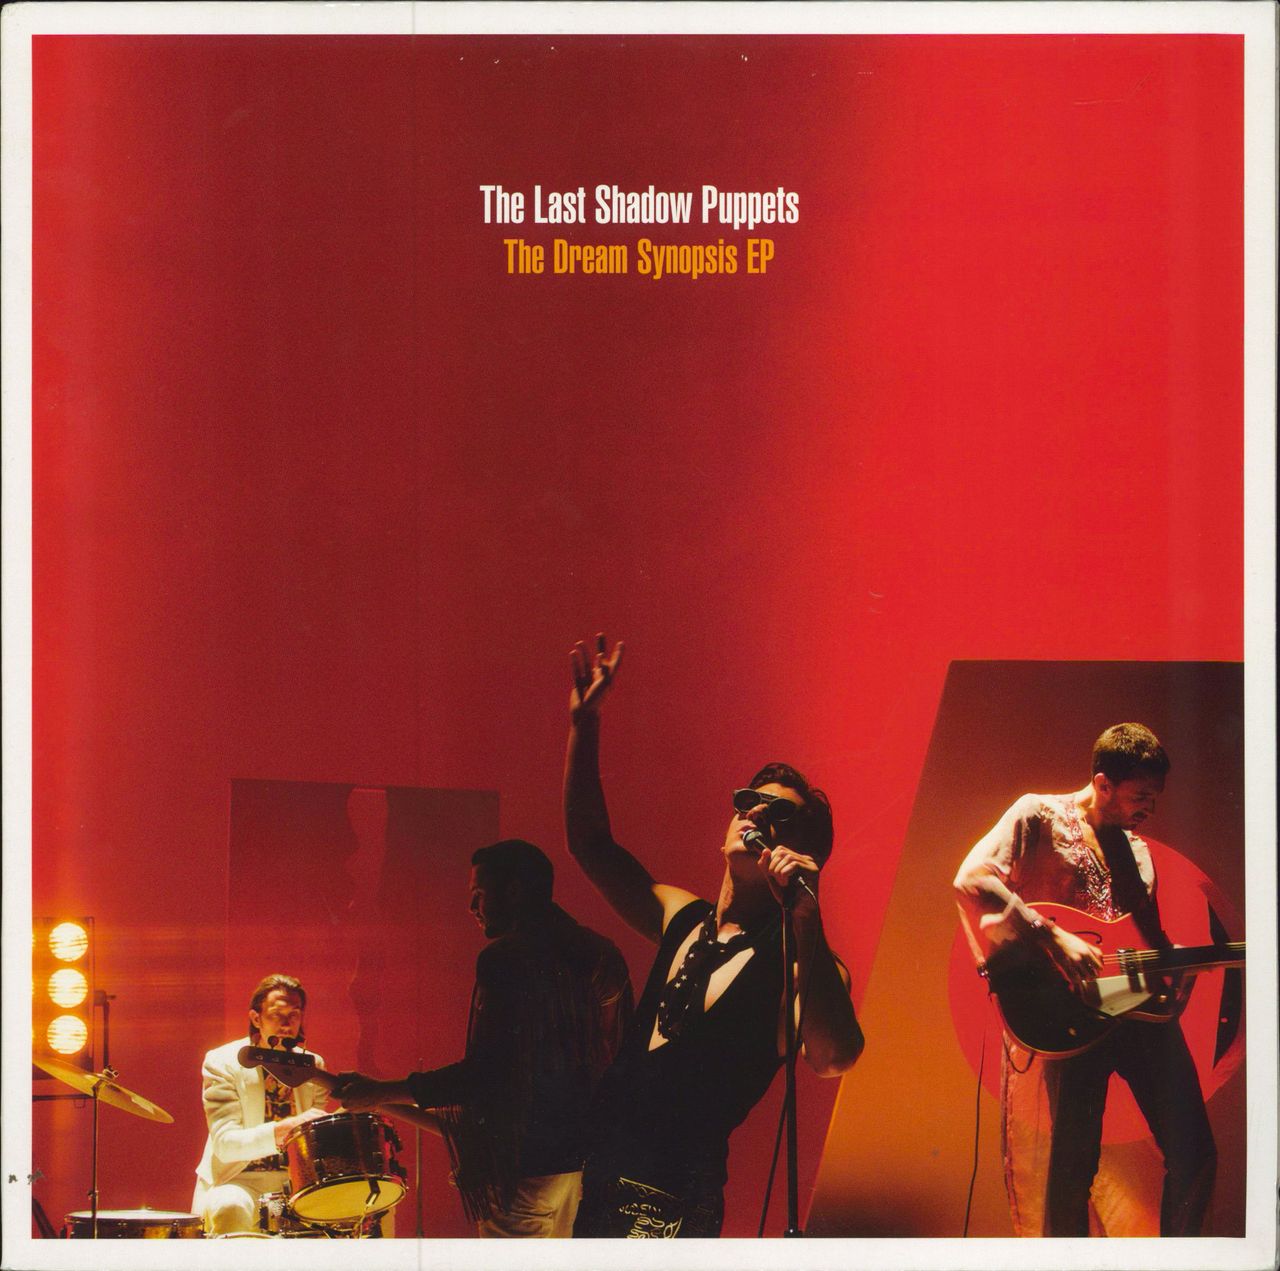 The Last Shadow Puppets The Dream Synopsis EP - 180gm UK 12" vinyl single (12 inch record / Maxi-single) RUG799T